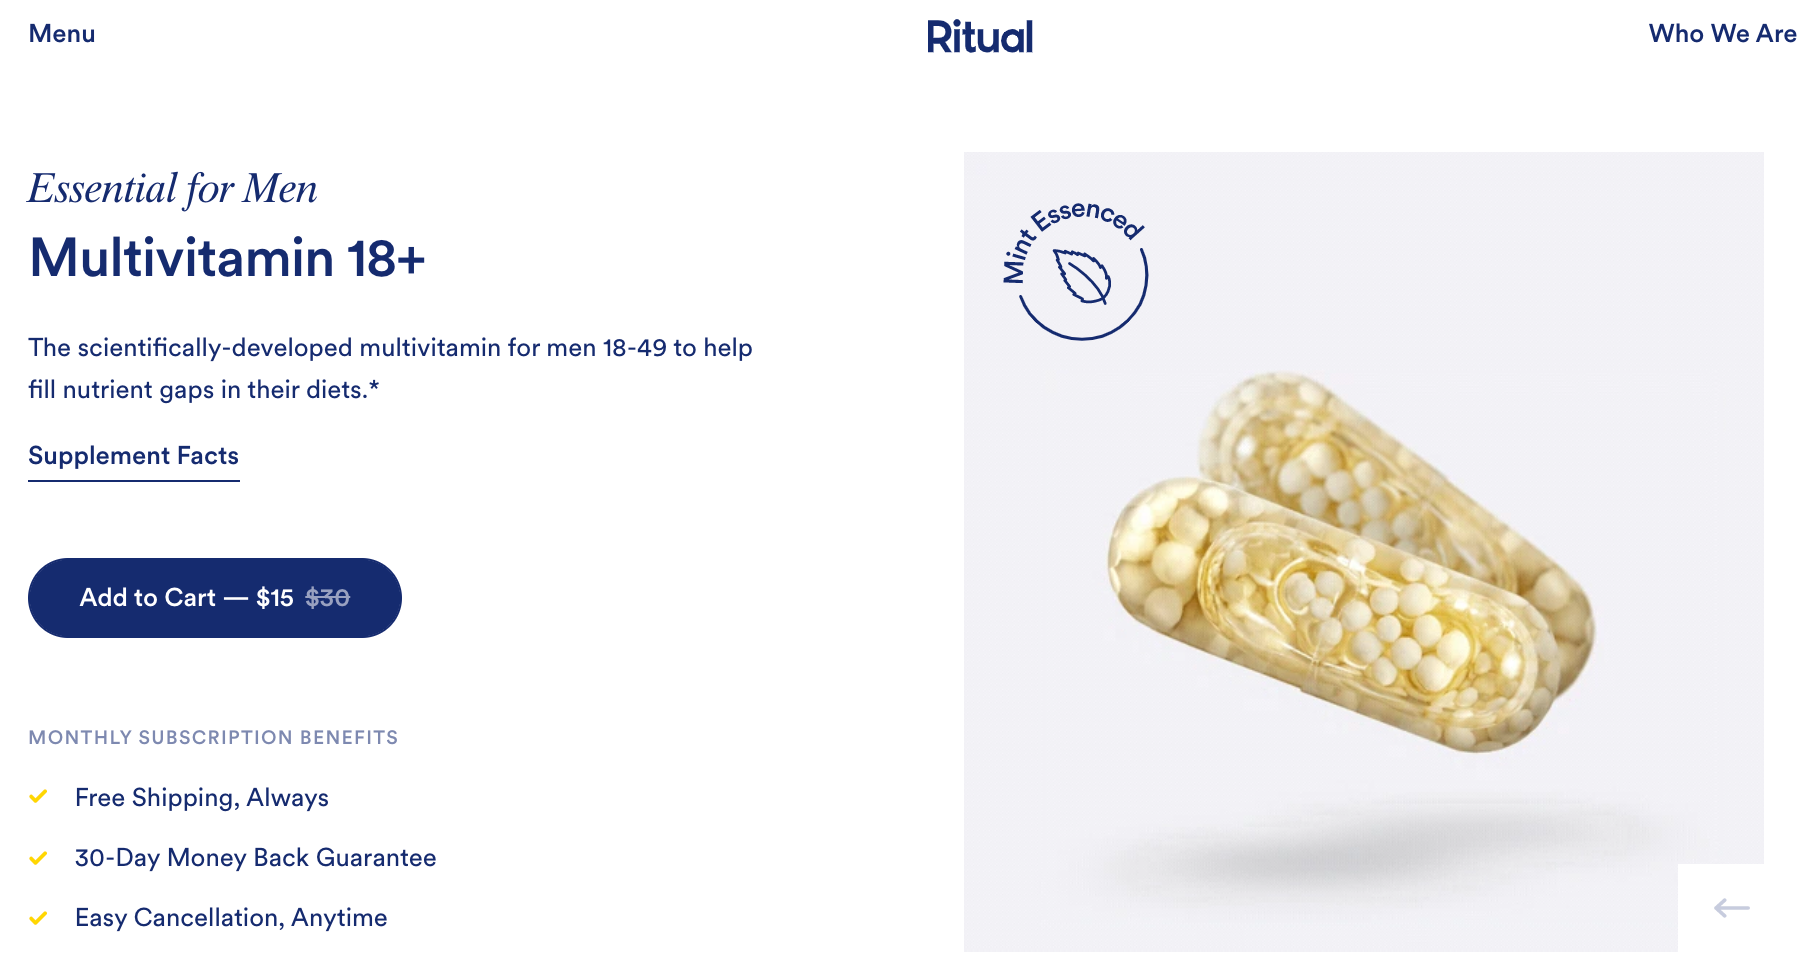 Ritual Vitamins product page